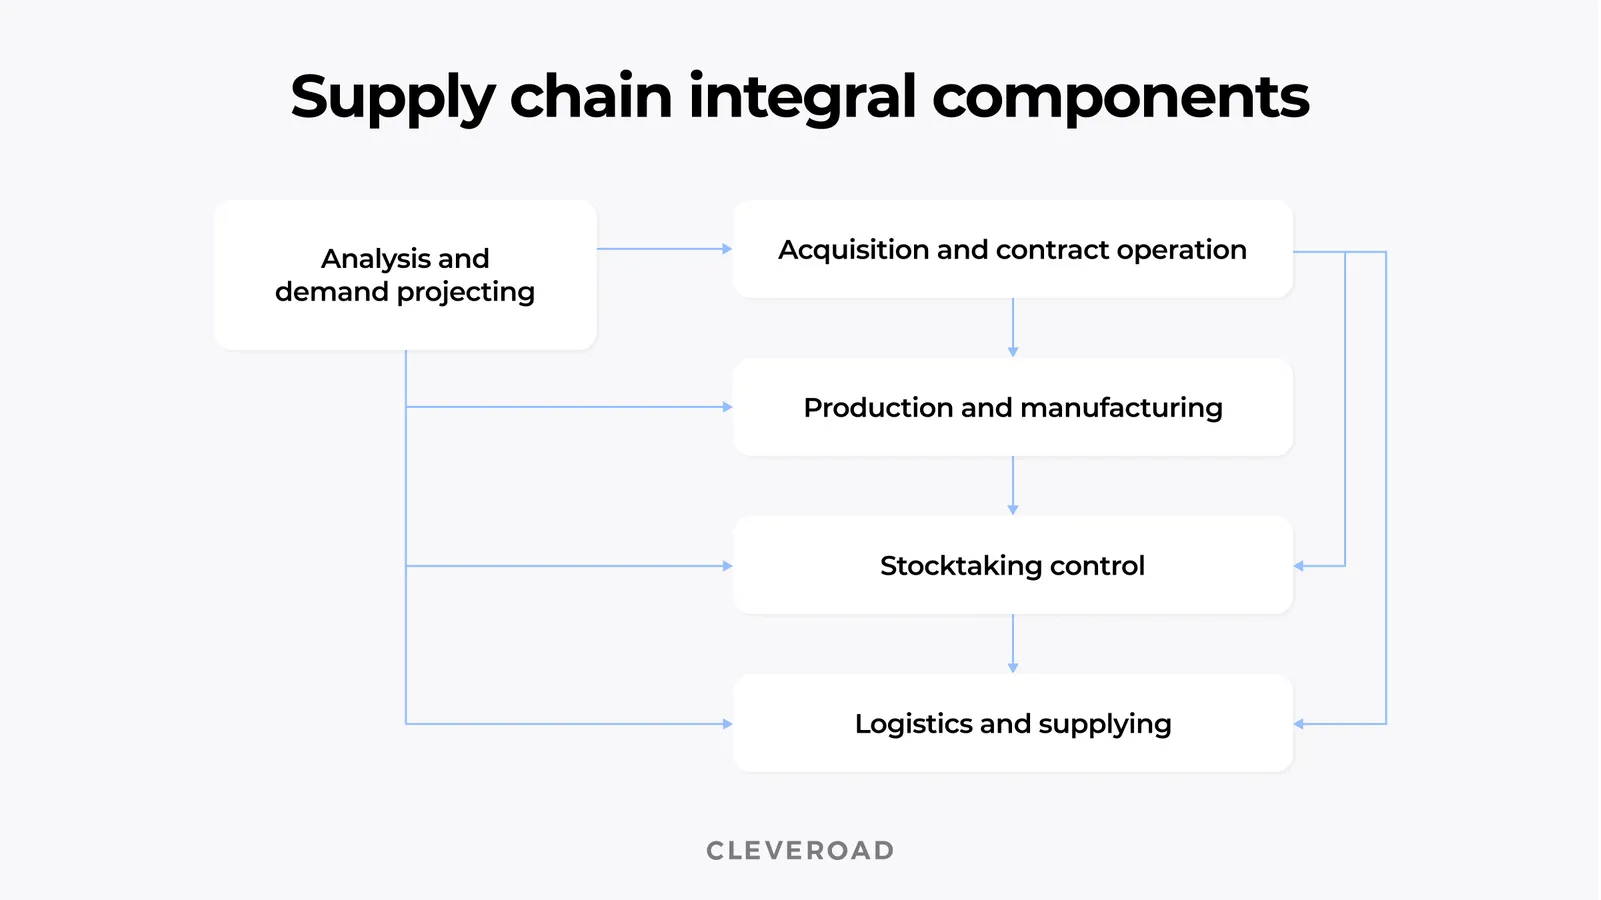 Essential elements of supply chain